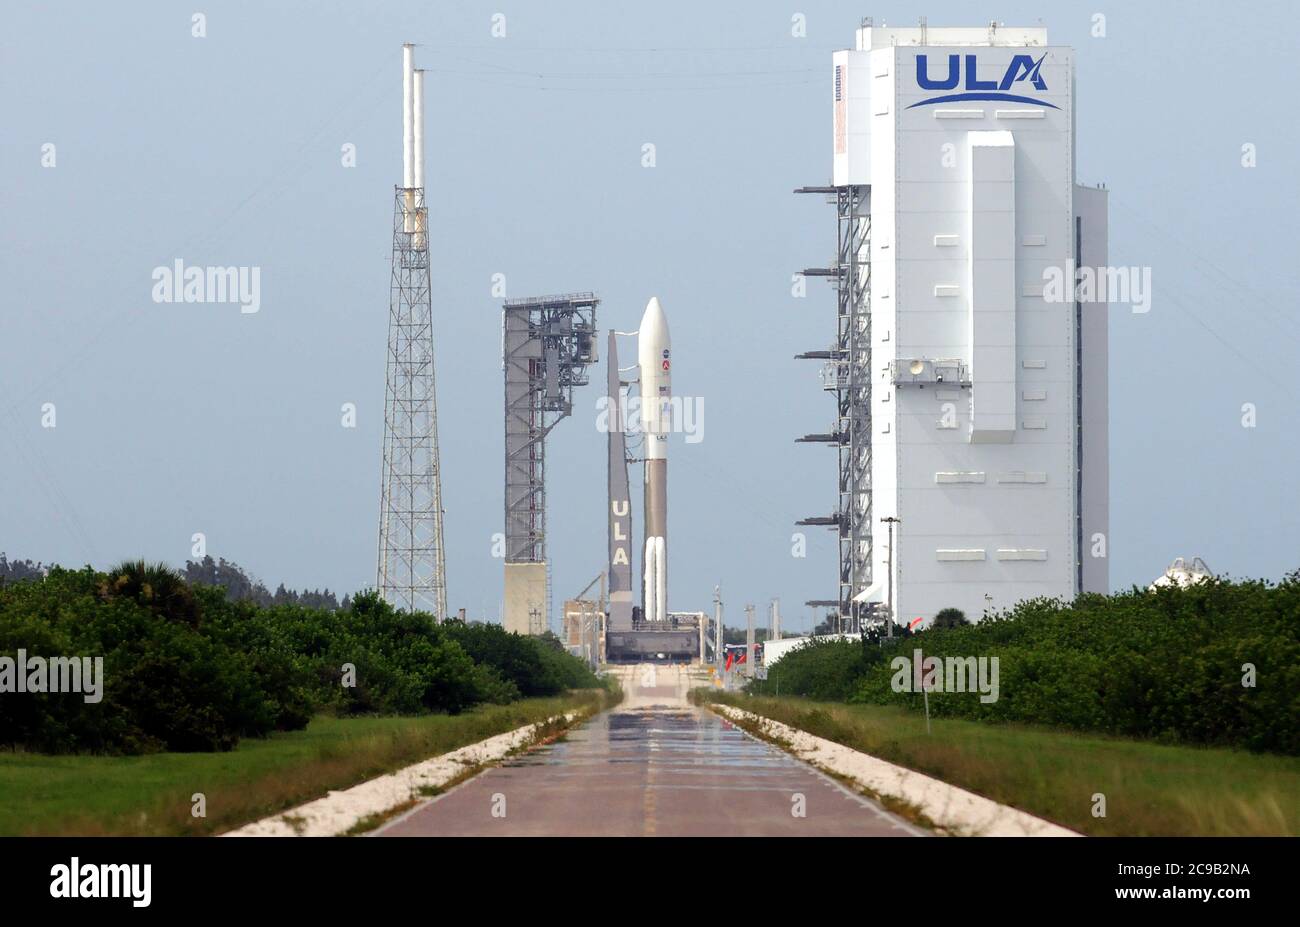 July 29, 2020 - Cape Canaveral, Florida, United States - An Atlas V rocket  with NASA's Perseverance rover stands ready for launch tomorrow morning at  pad 41 at Cape Canaveral Air Force